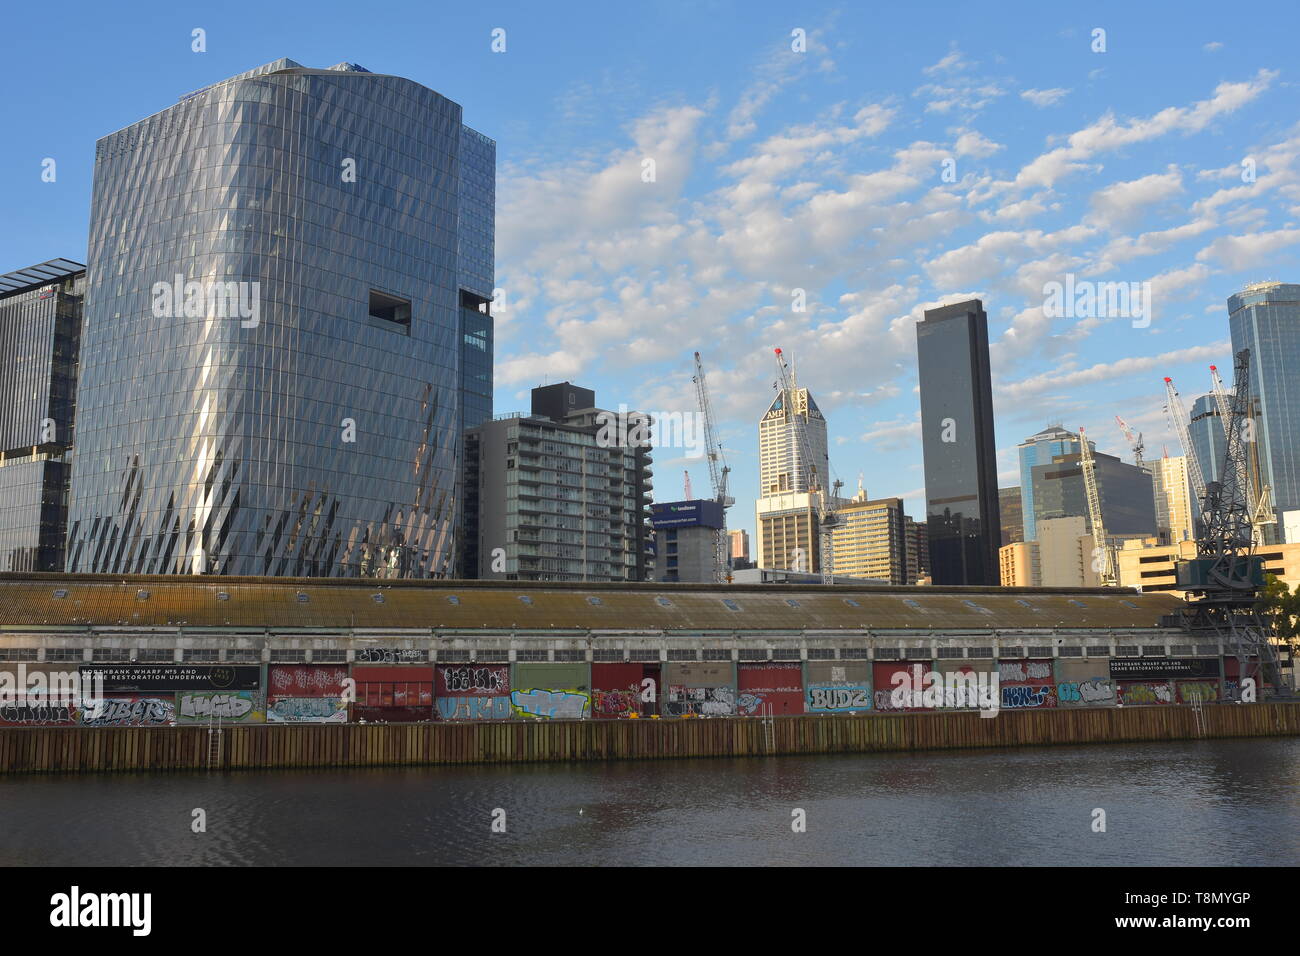 Industrial building with walls covered with graffiti on northern bank of Yarra River with modern high rise buildings in background. Stock Photo